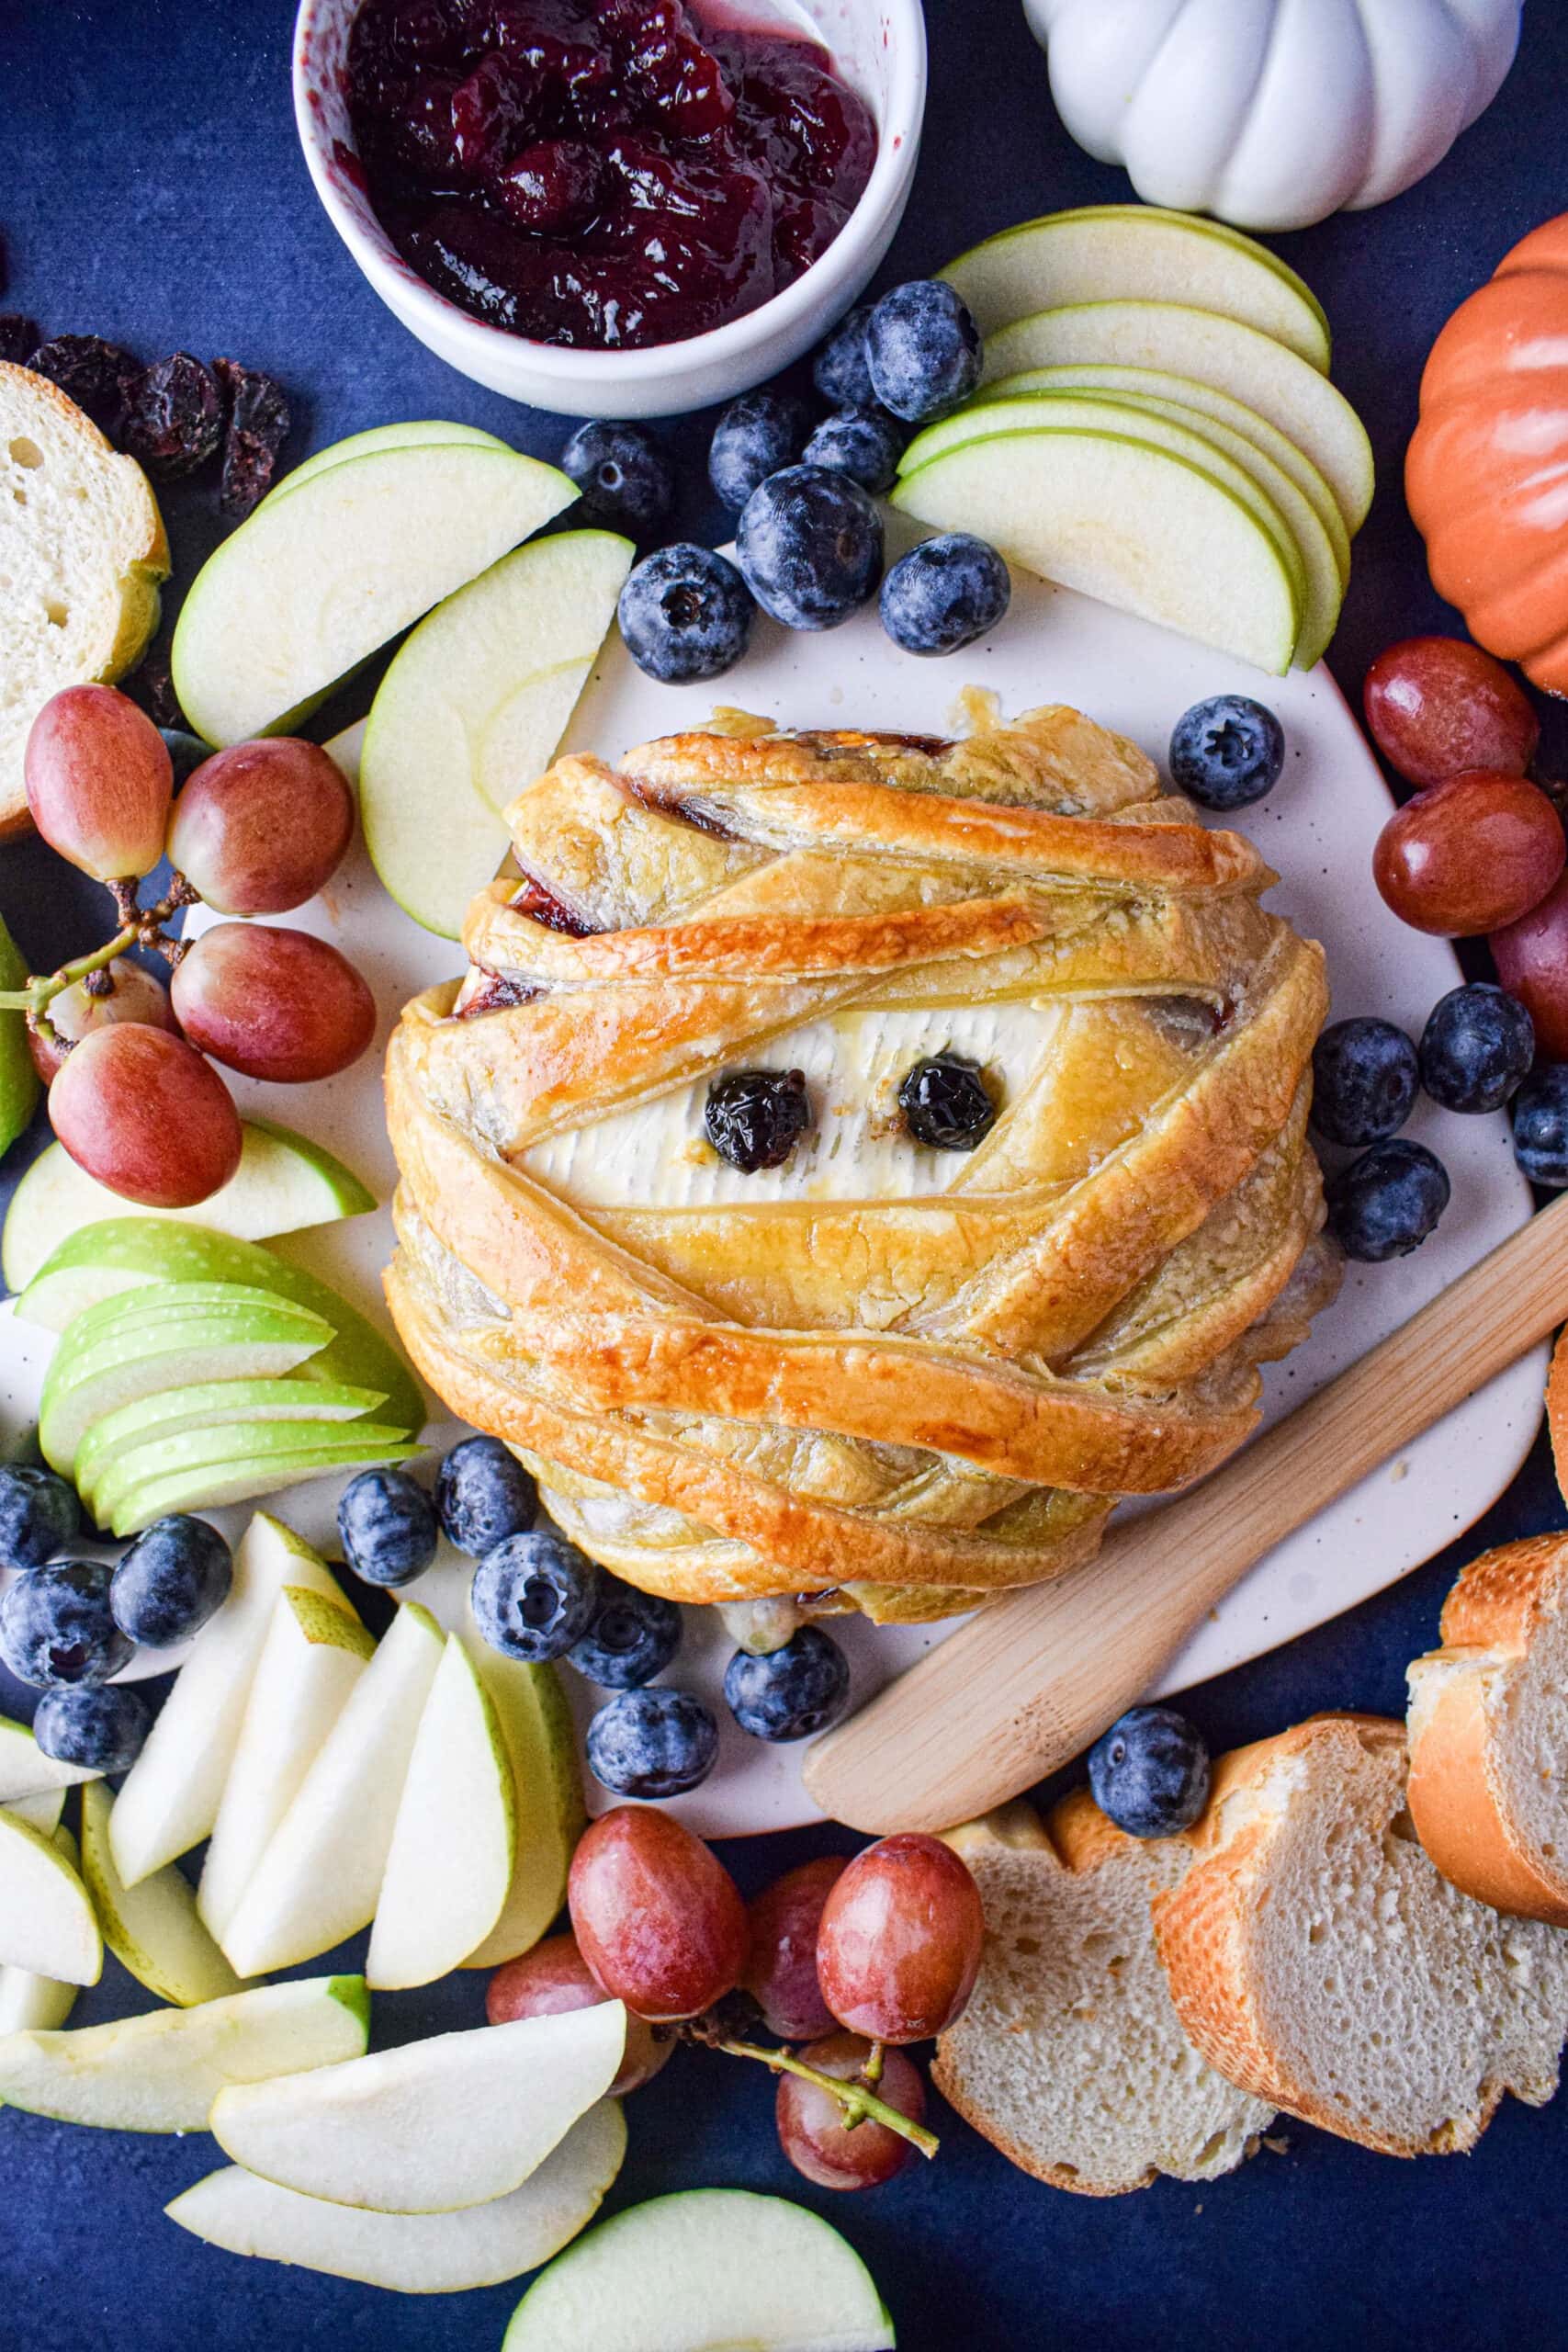 Puff pastry with a creamy Brie filling, adorned with two berry eyes, surrounded by apple slices and bread on a white plate.